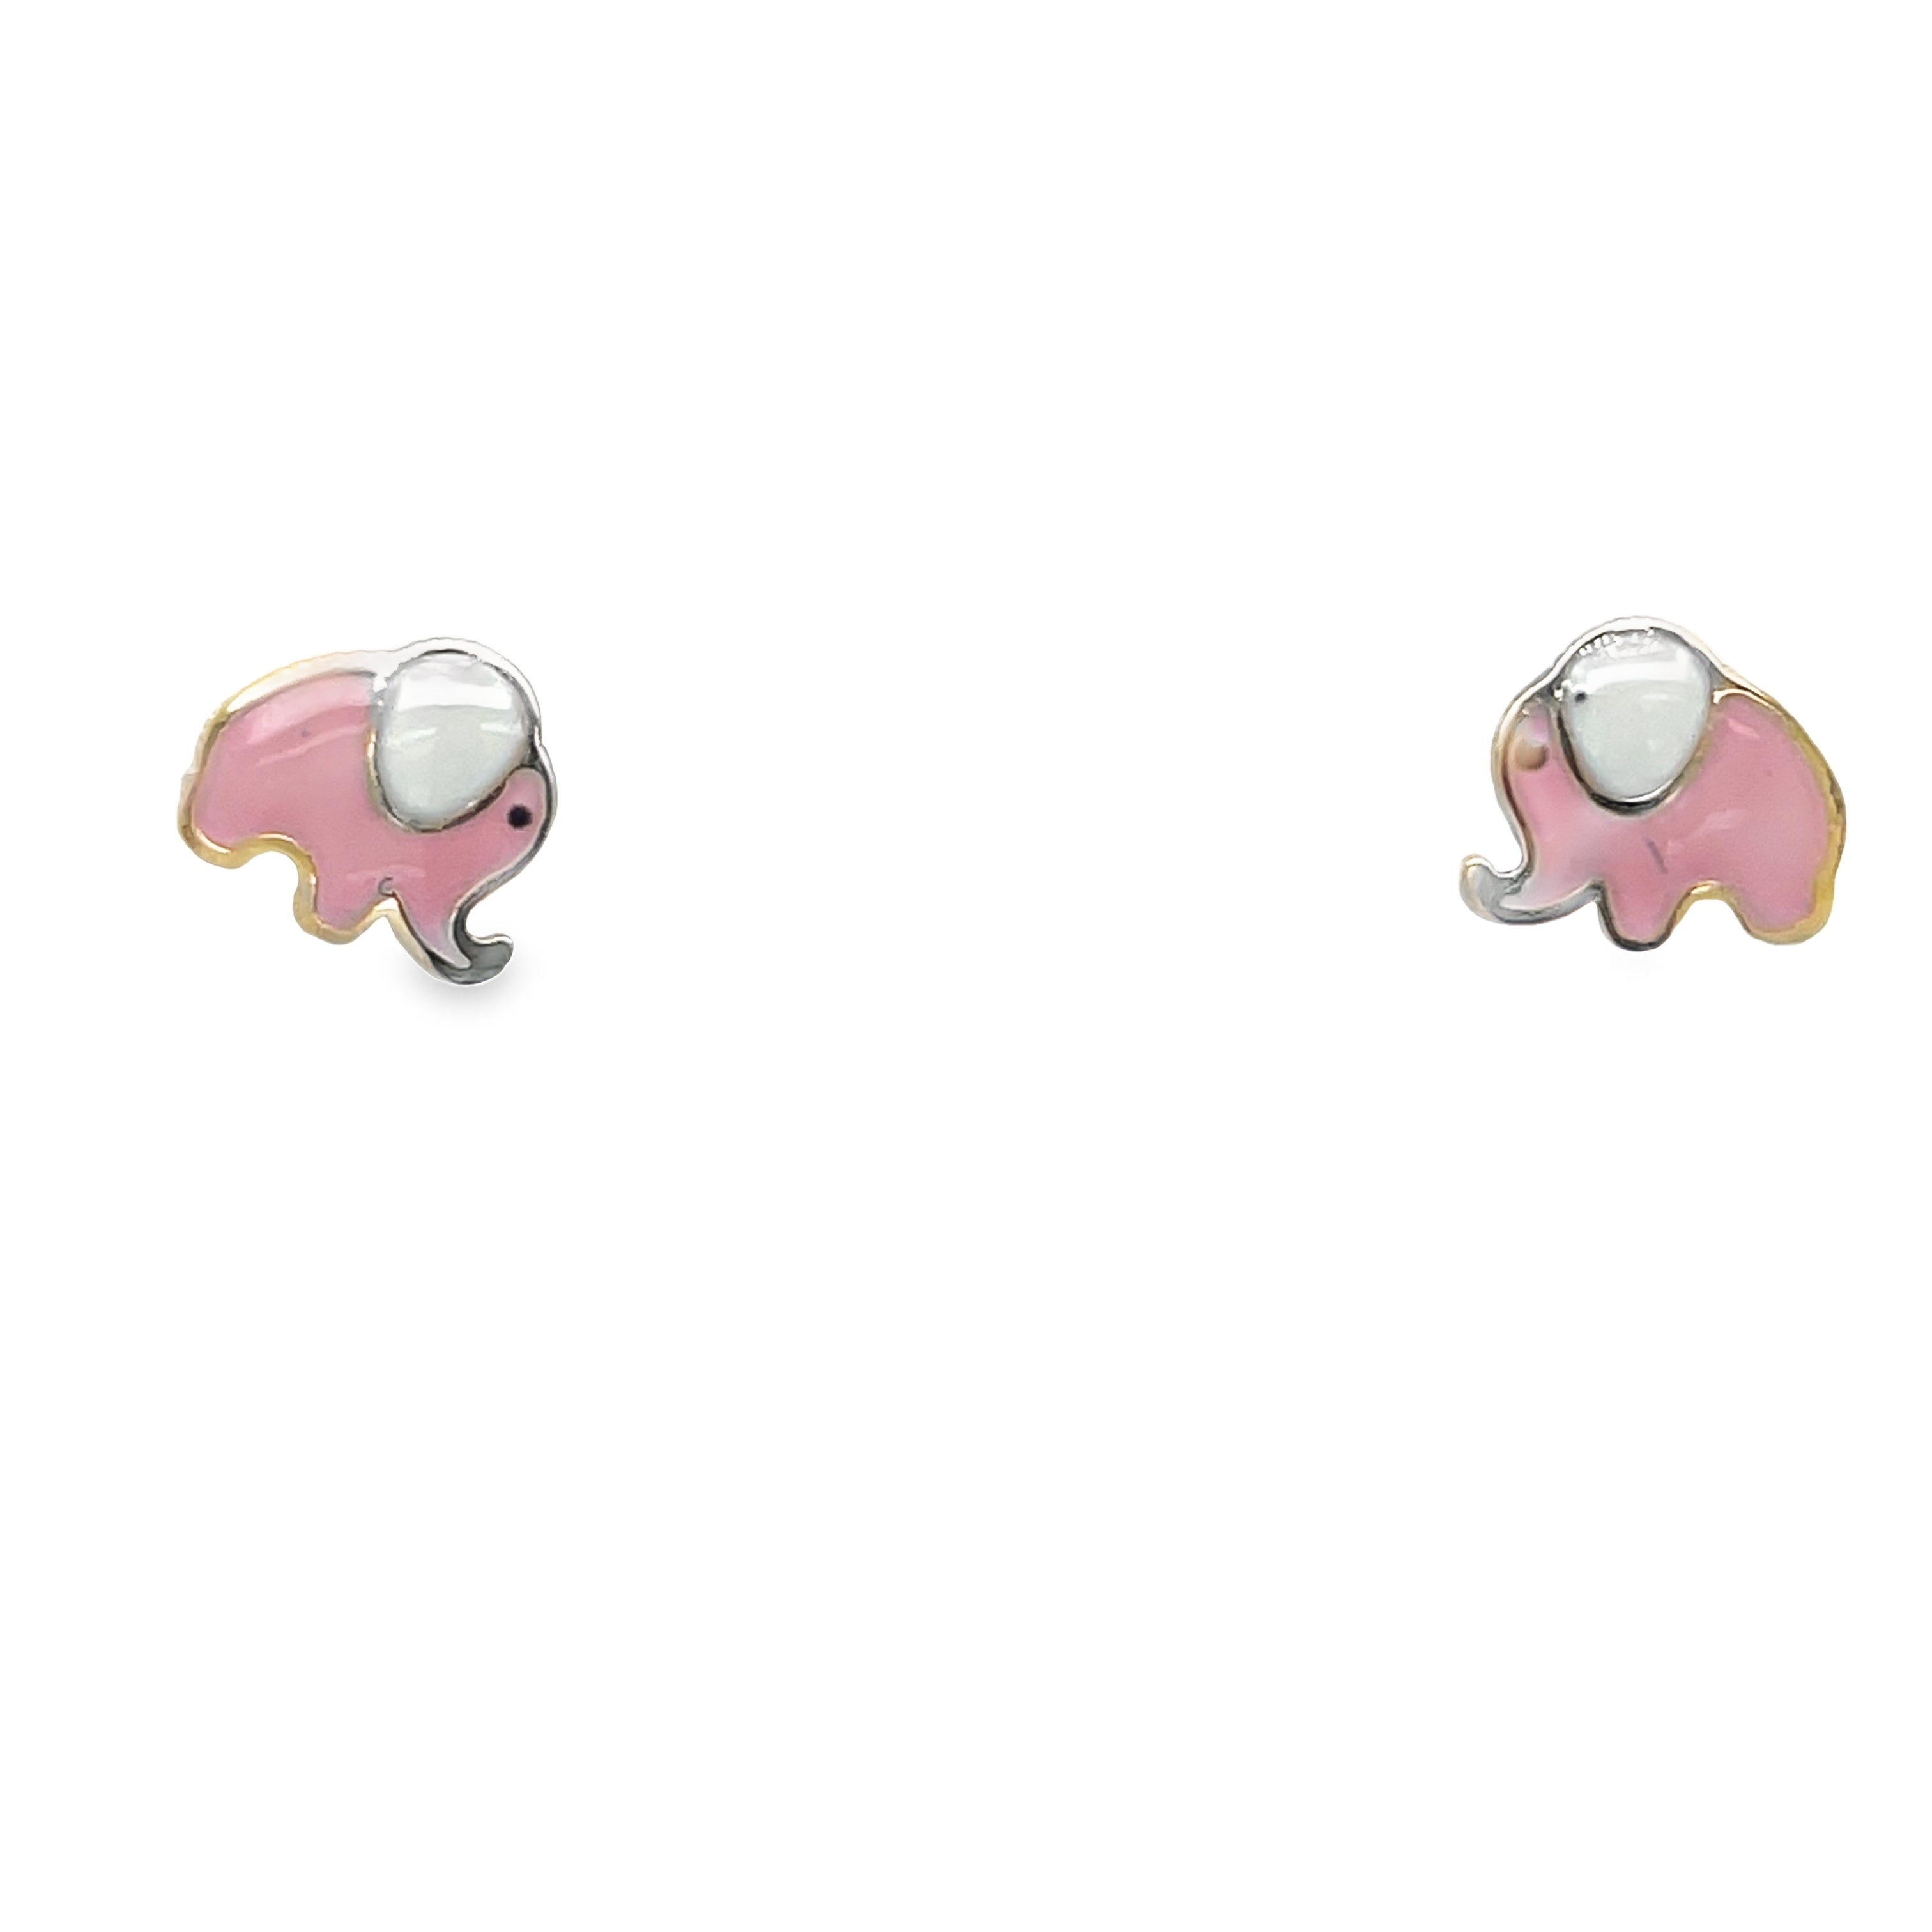 <p><span style="font-size: 0.875rem;">These exquisite flower earrings for babies feature 14k yellow gold construction with elephant shape securely affixed using baby screw backs.</span></p> <p>&nbsp;</p>